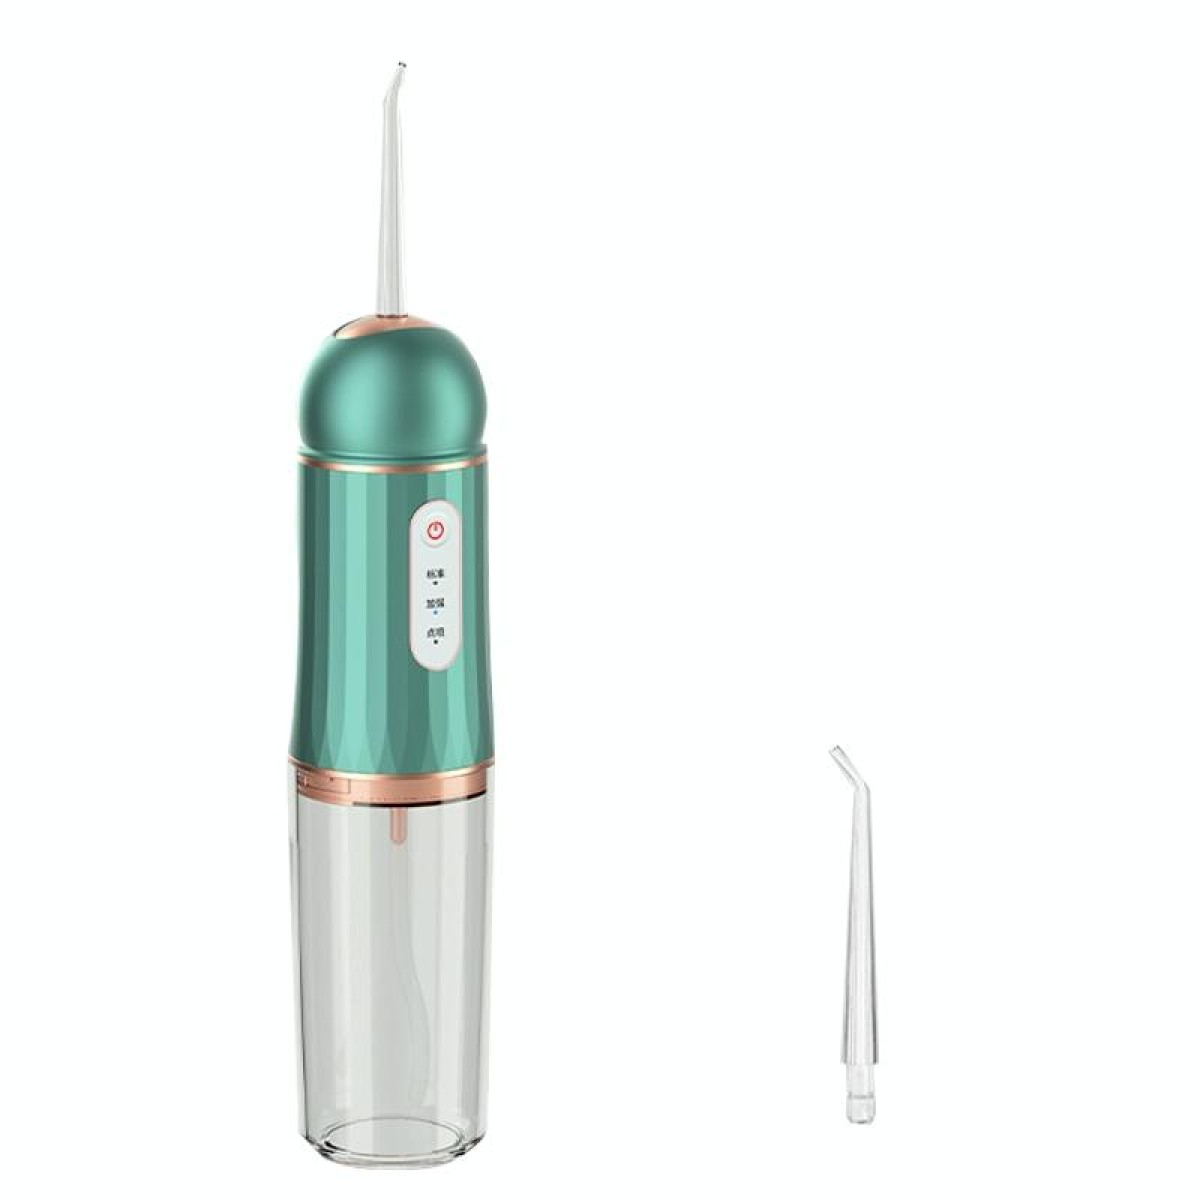 A9 Household Electric Portable Tooth Cleaner Oral Care Dental Floss Tooth Cleaning 1 Nozzle(Green Gold)